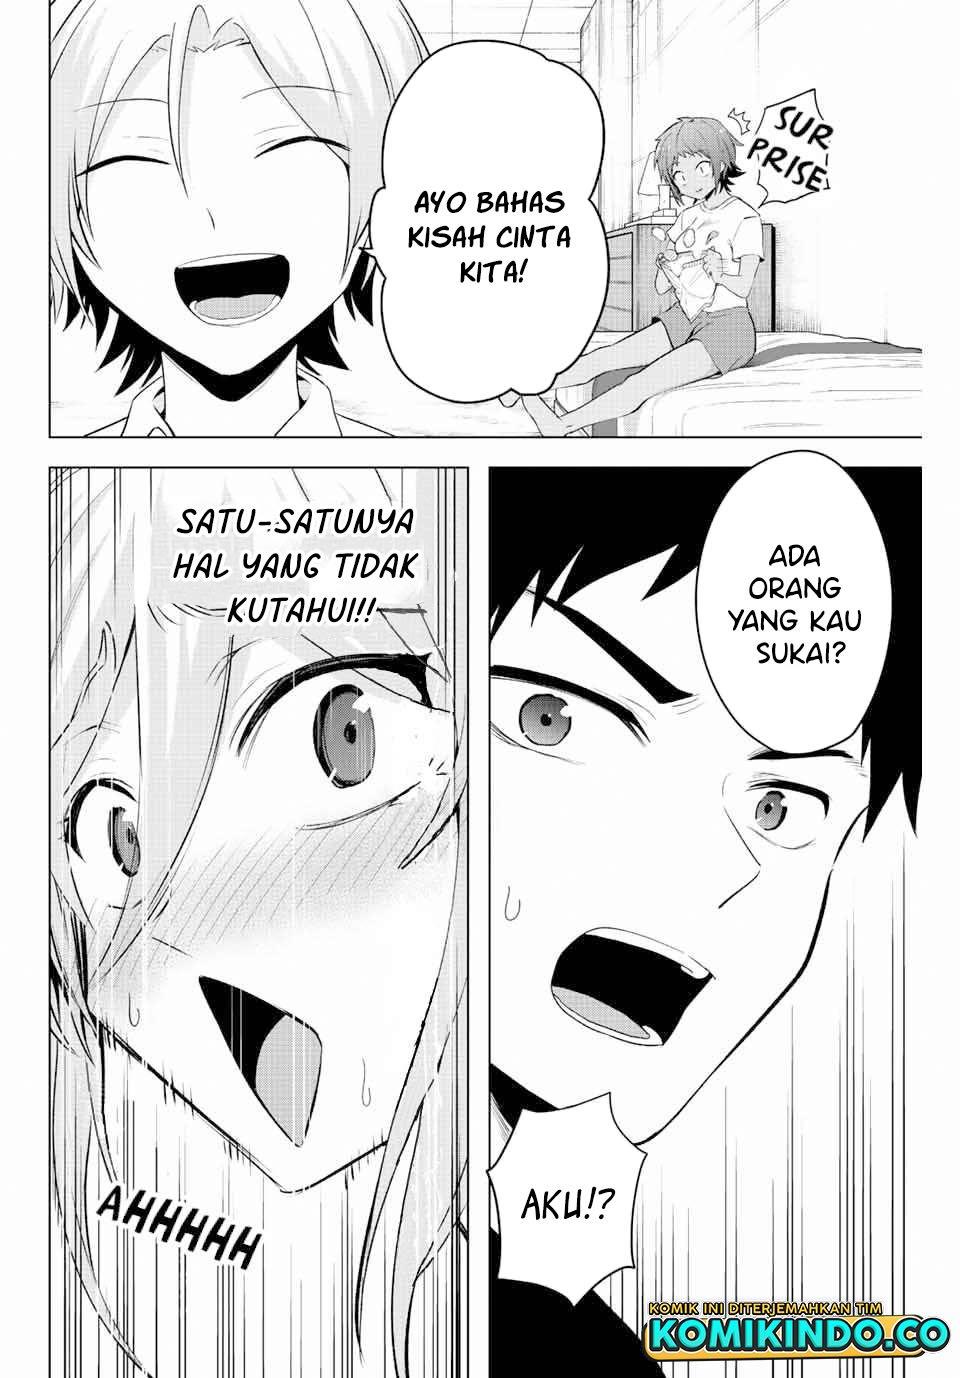 The Death Game Is All That Saotome-san Has Left Chapter 7